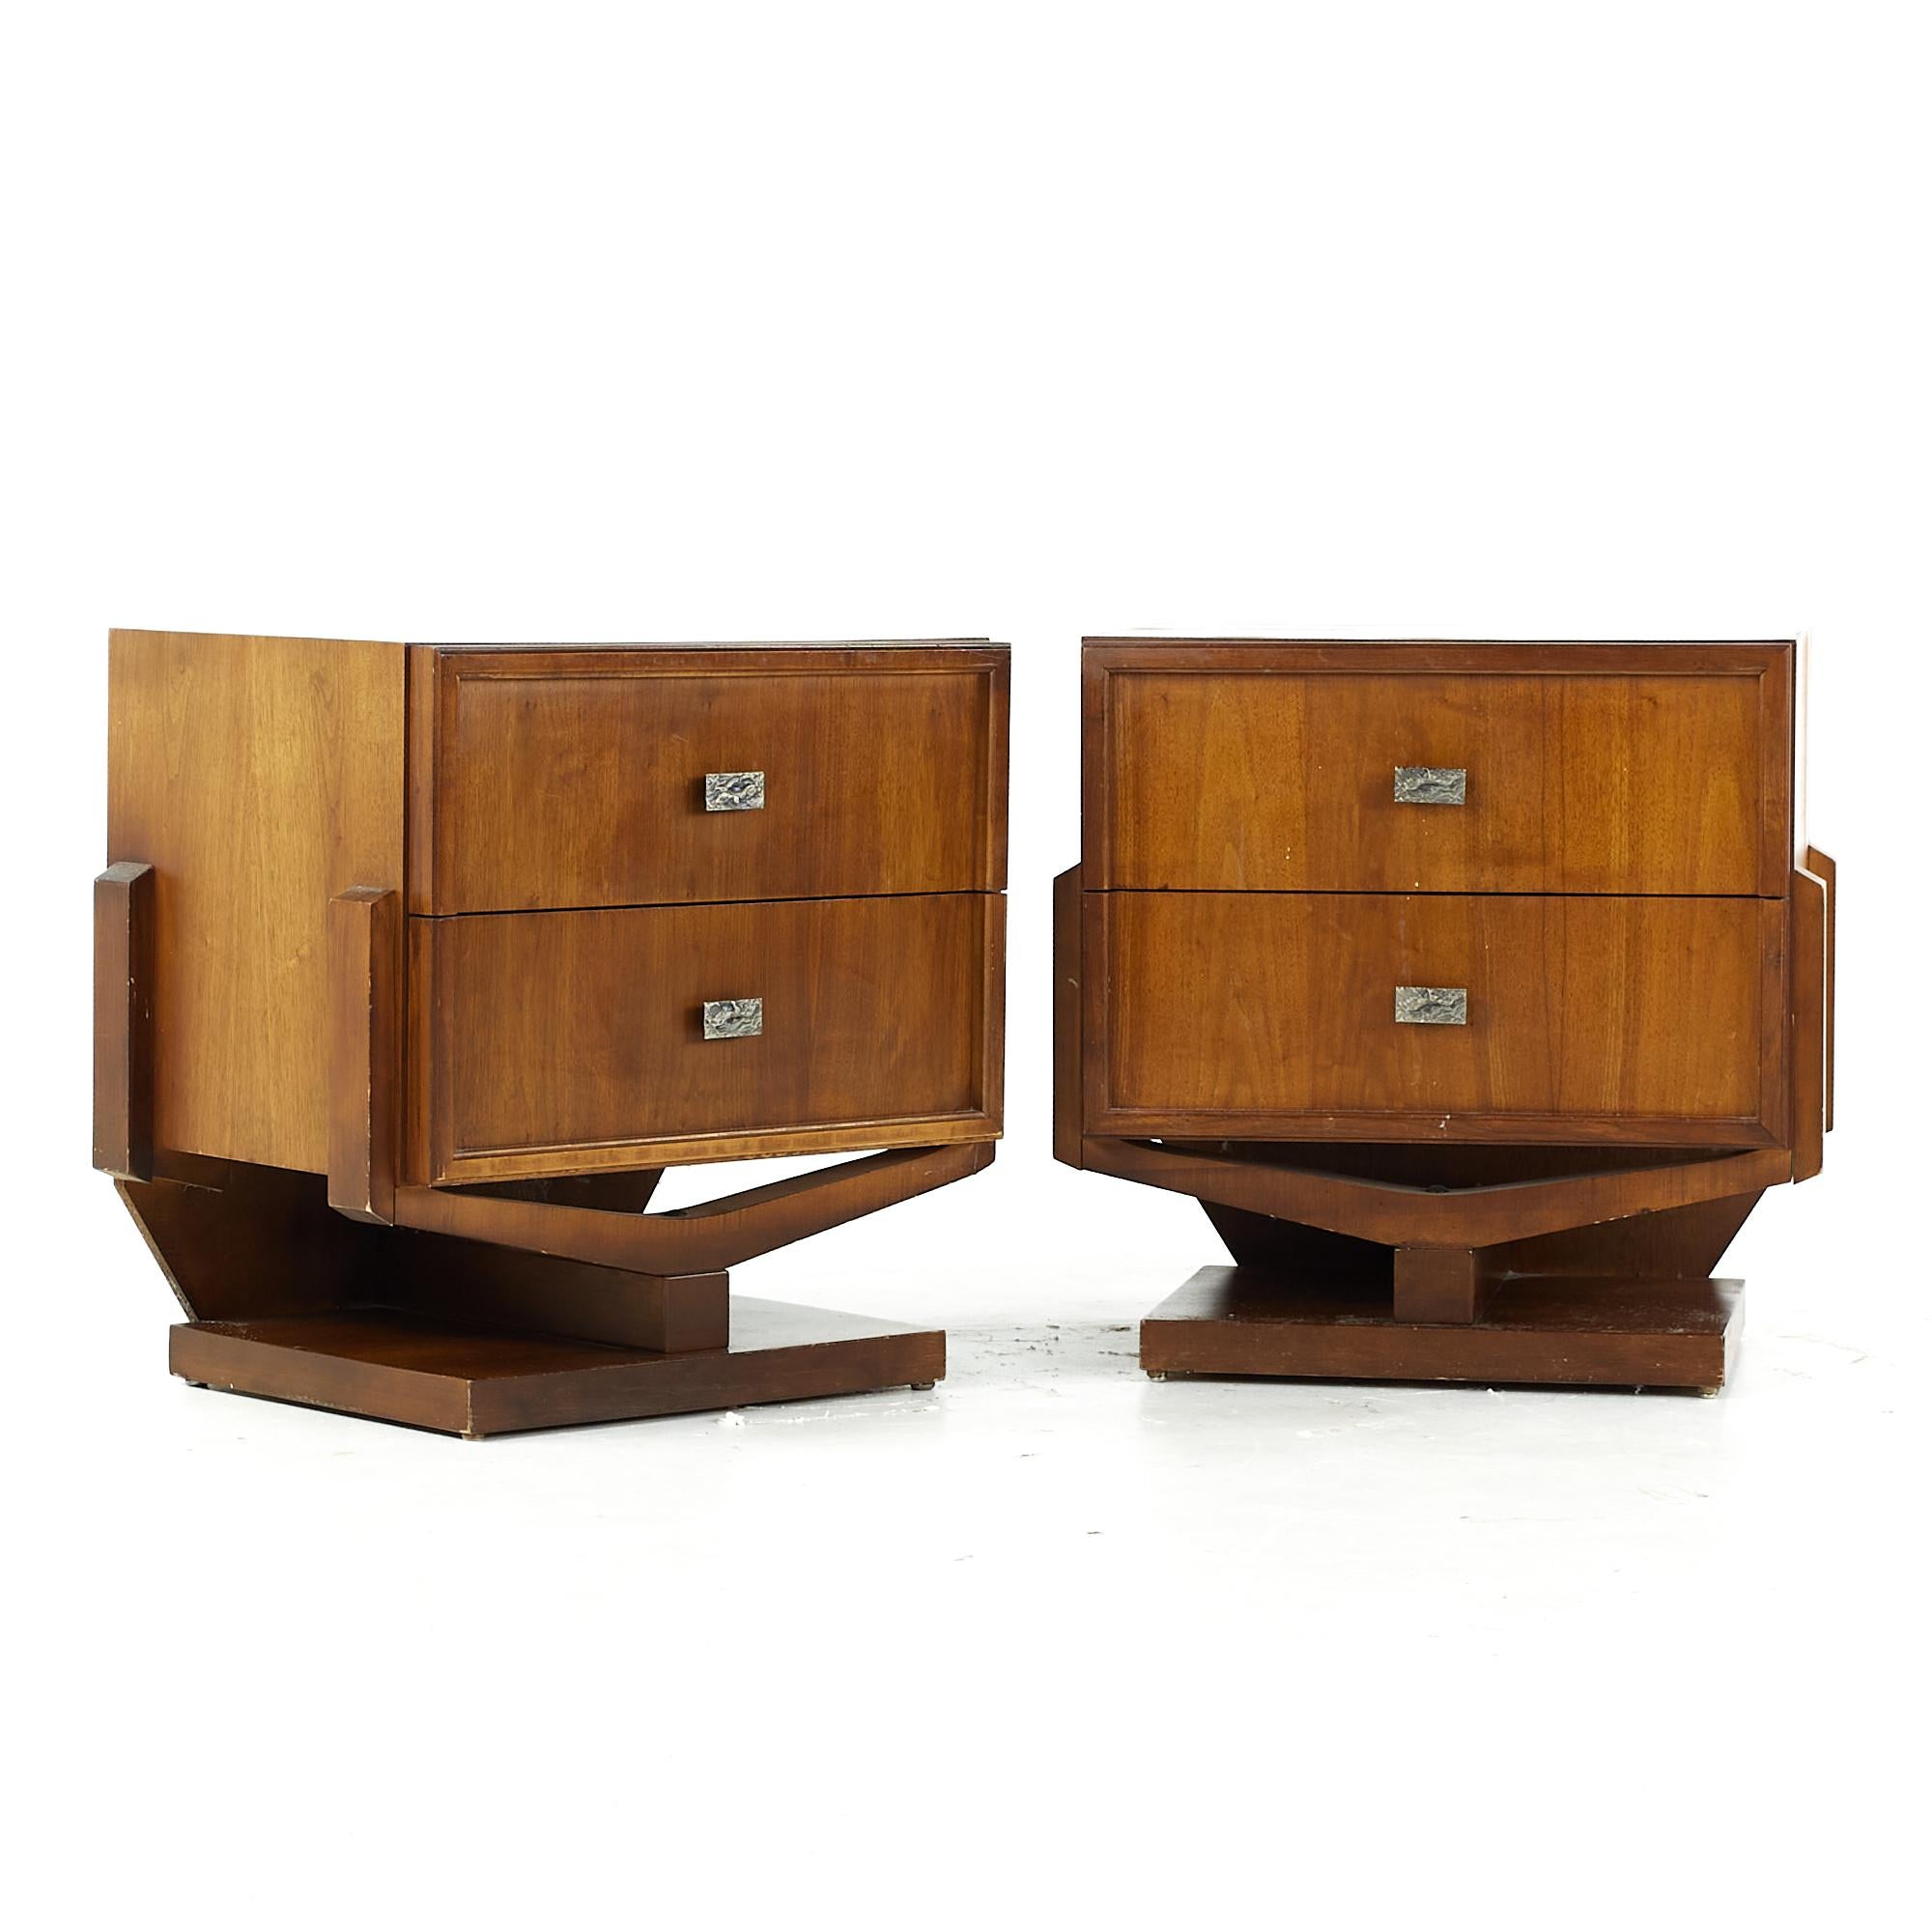 Paul Evans Style midcentury walnut Canadian Brutalist nightstands - pair

Each nightstand measures: 25.5 wide x 18.5 deep x 25 inches high

All pieces of furniture can be had in what we call restored vintage condition. That means the piece is